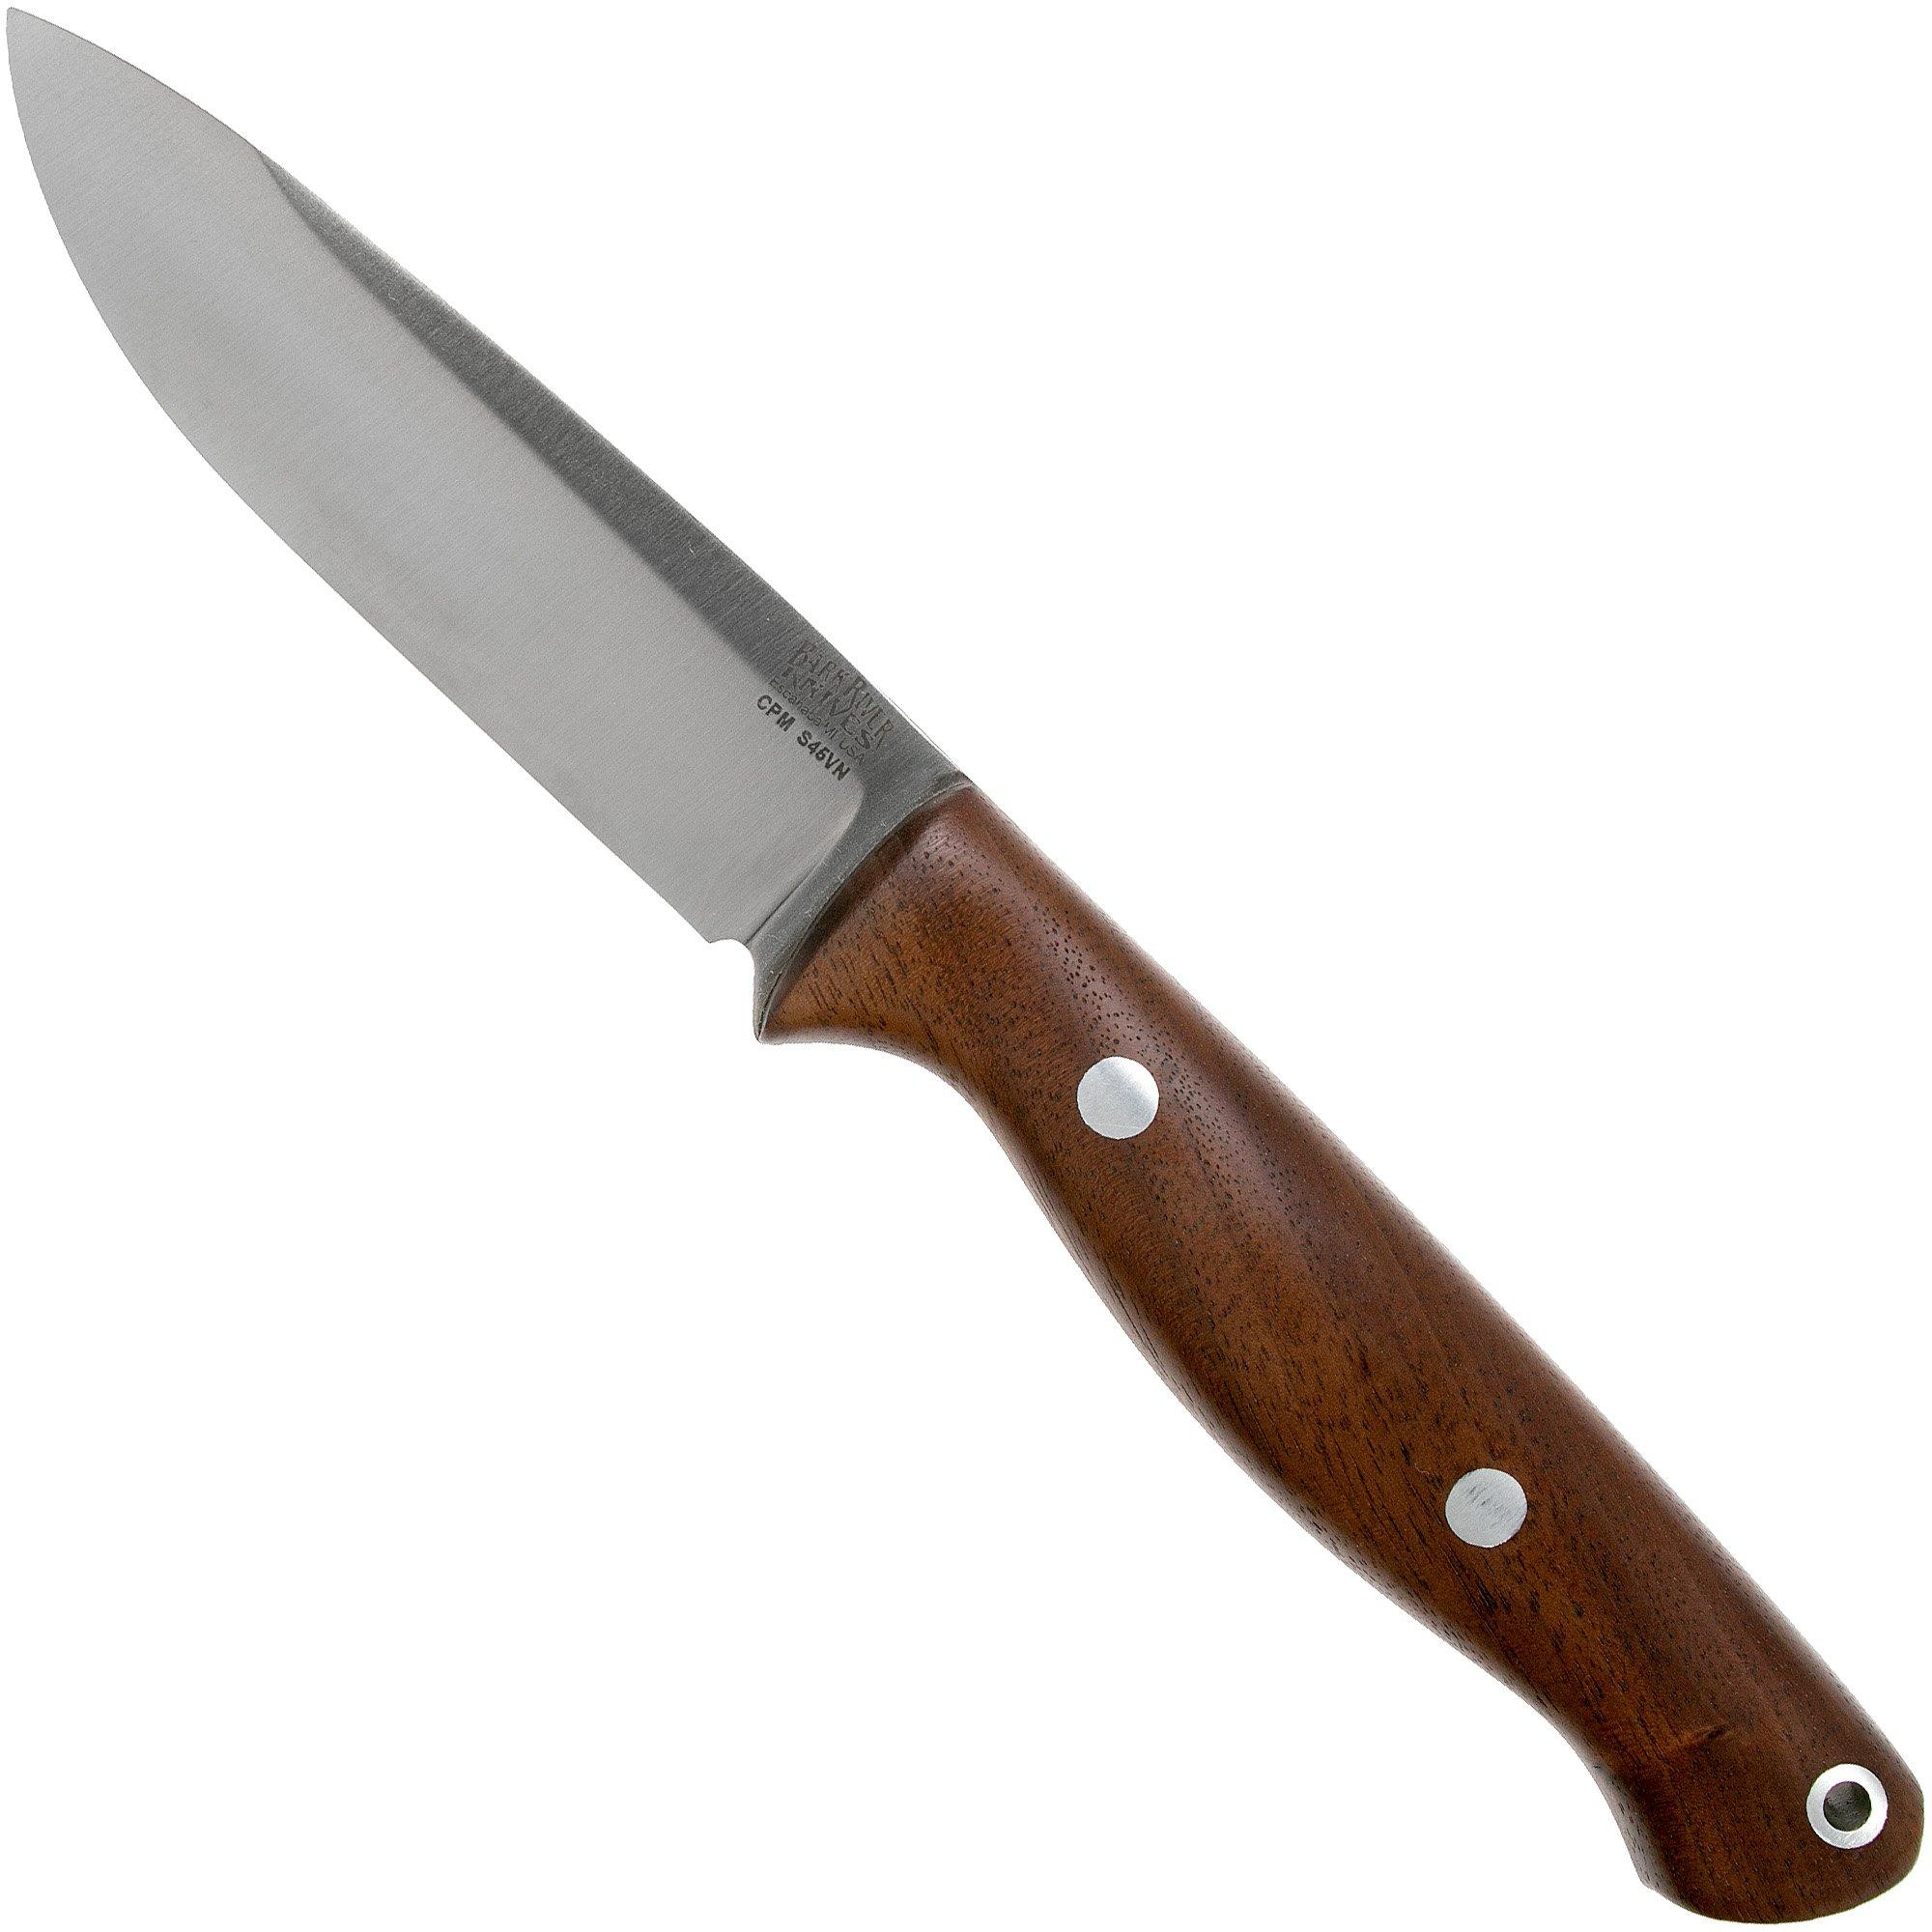 Basic Knife Safety: how do you safely use an outdoor knife?